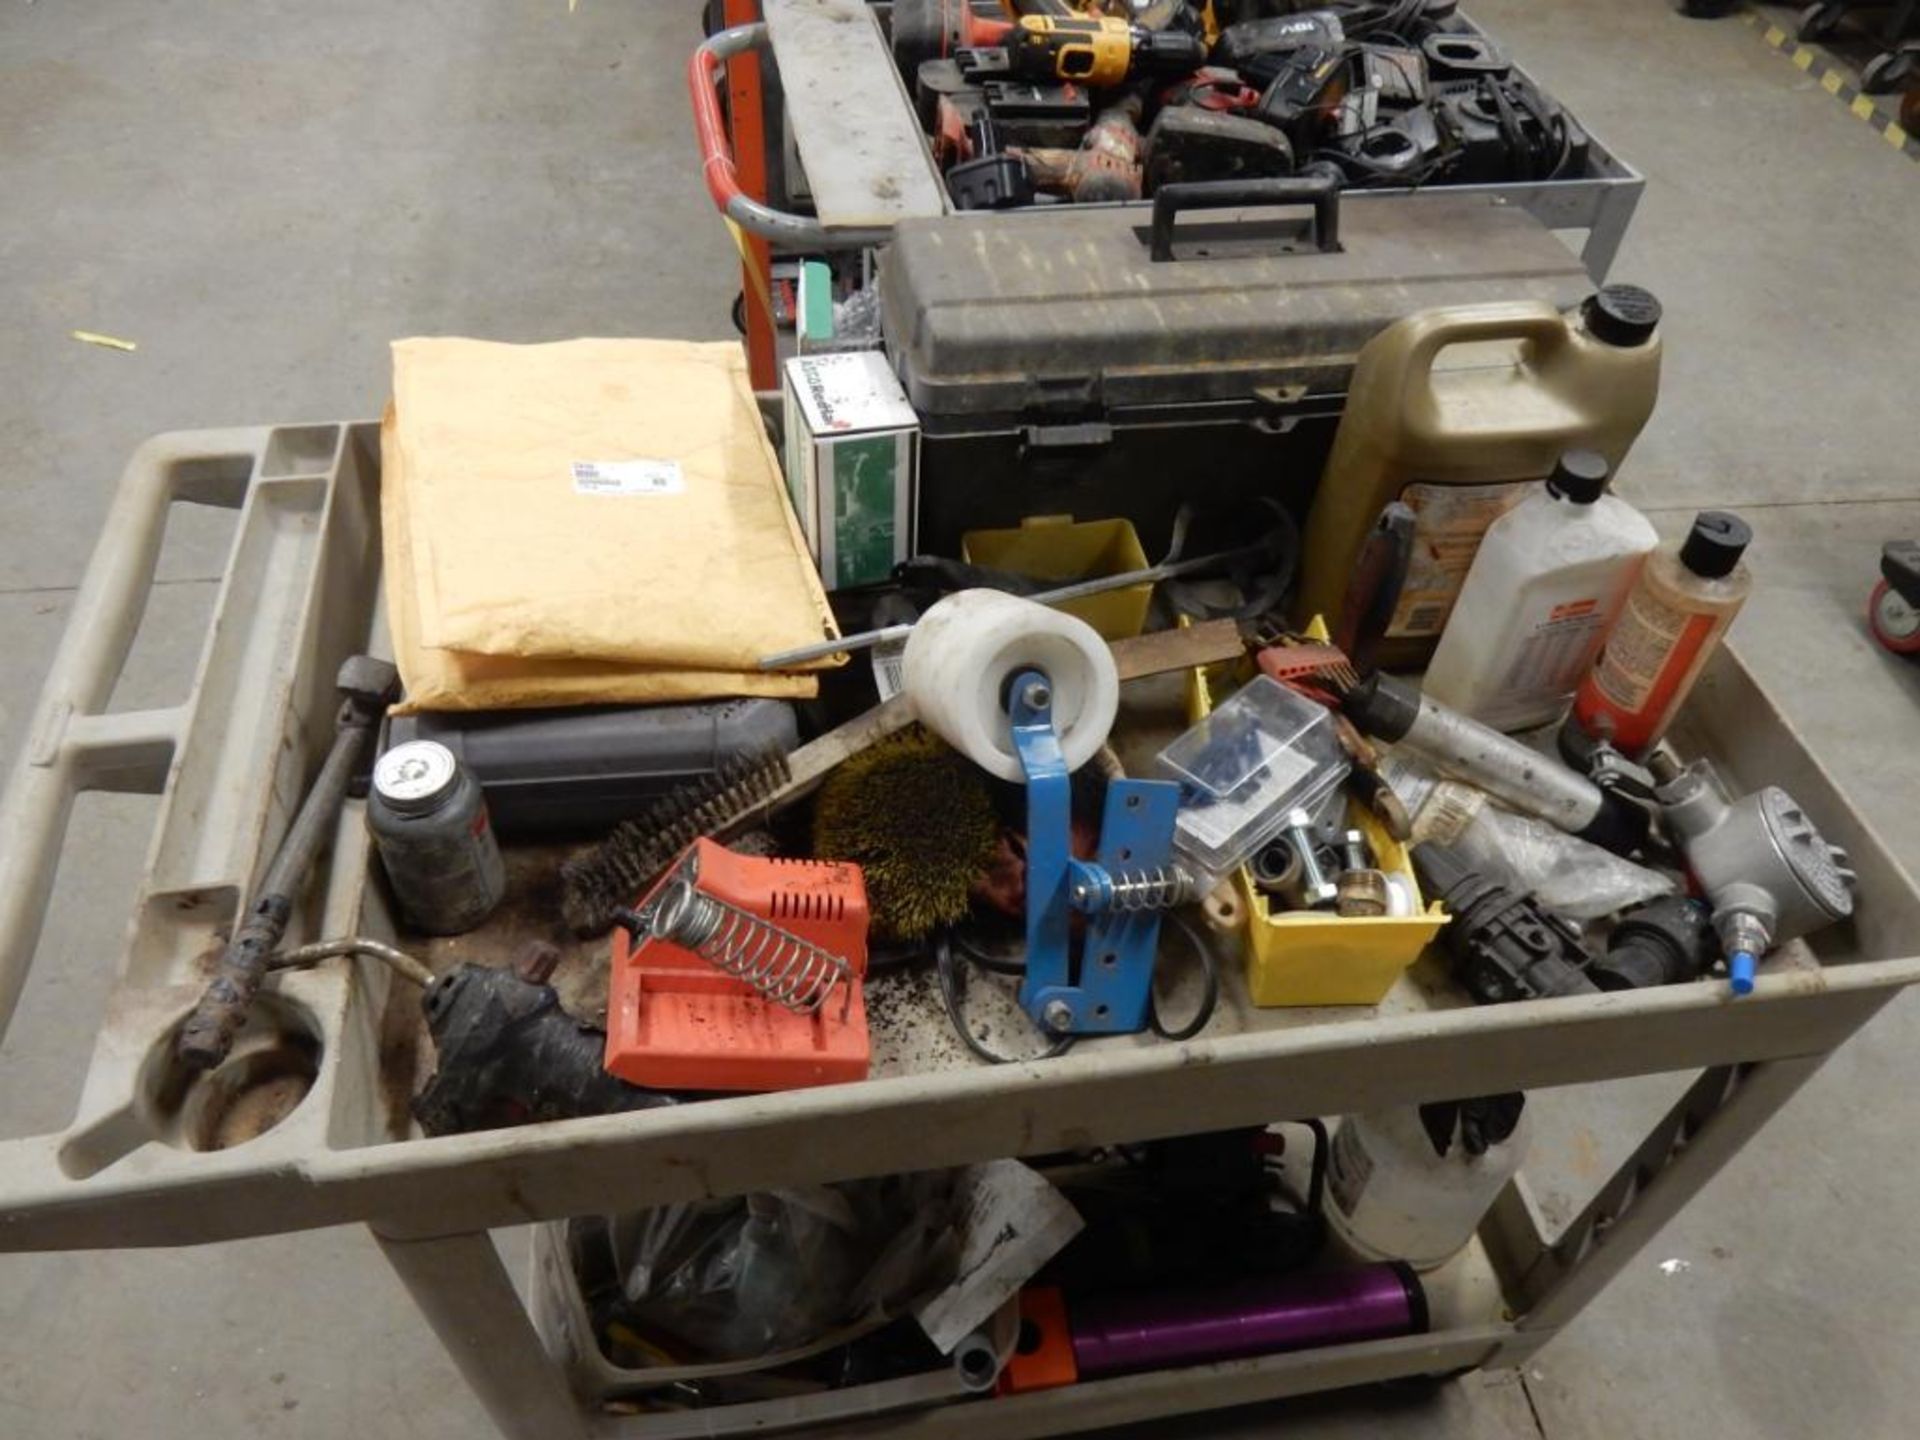 LOT (2) SHOP CARTS W/MISC. ITEMS - CORDLESS TOOLS & CHARGERS, PUMP, ETC. - Image 3 of 4